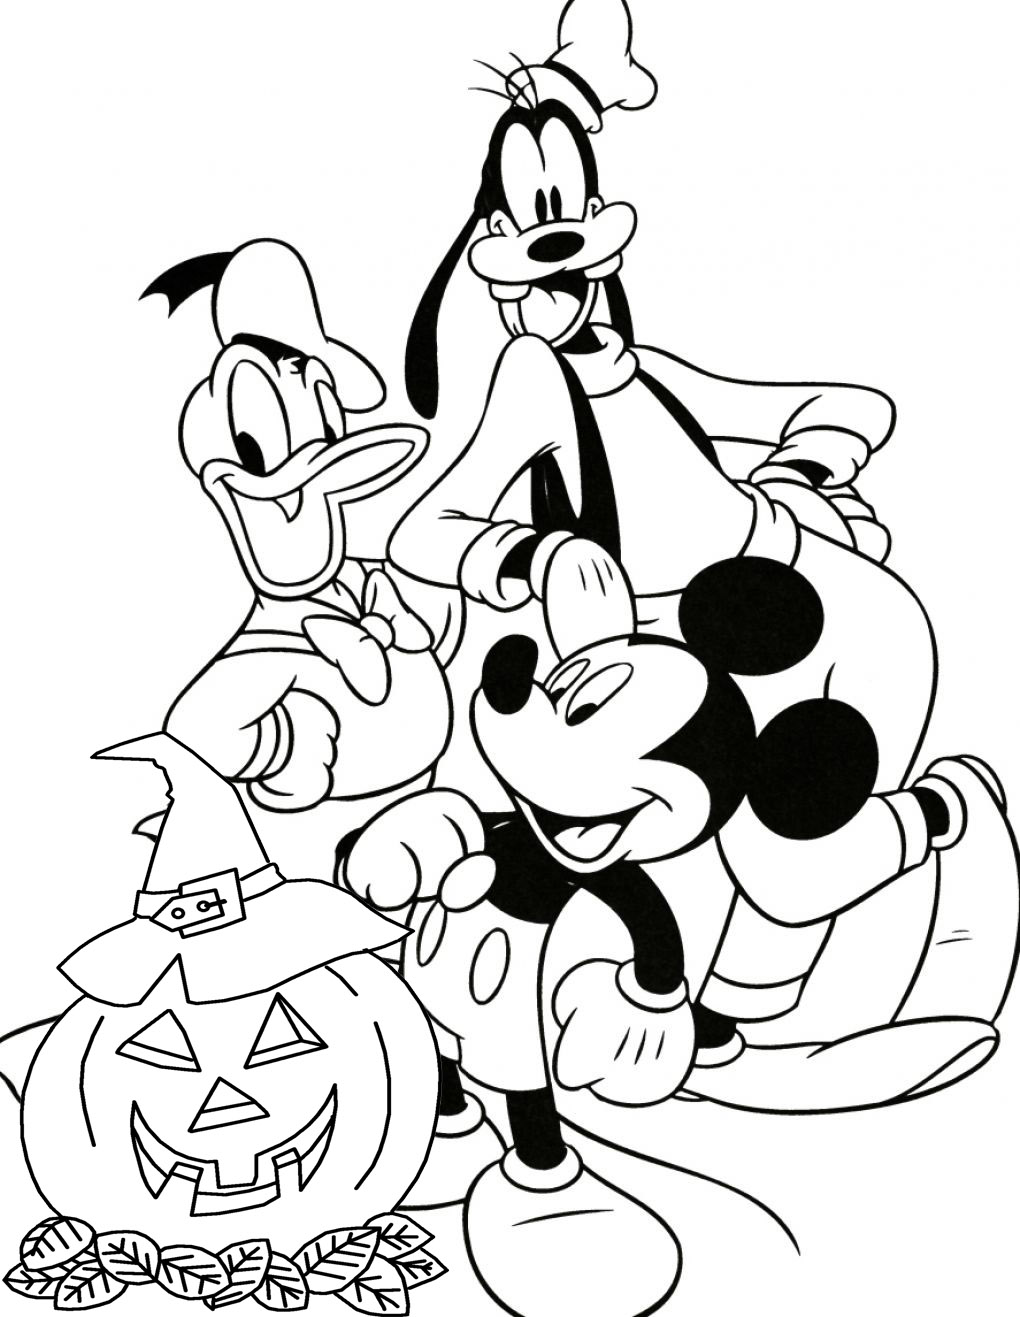 We hope you ll enjoy these two Disney Halloween coloring pages that show Minnie Mouse Mickey Mouse Donald Duck and Goofy these images are nice and big